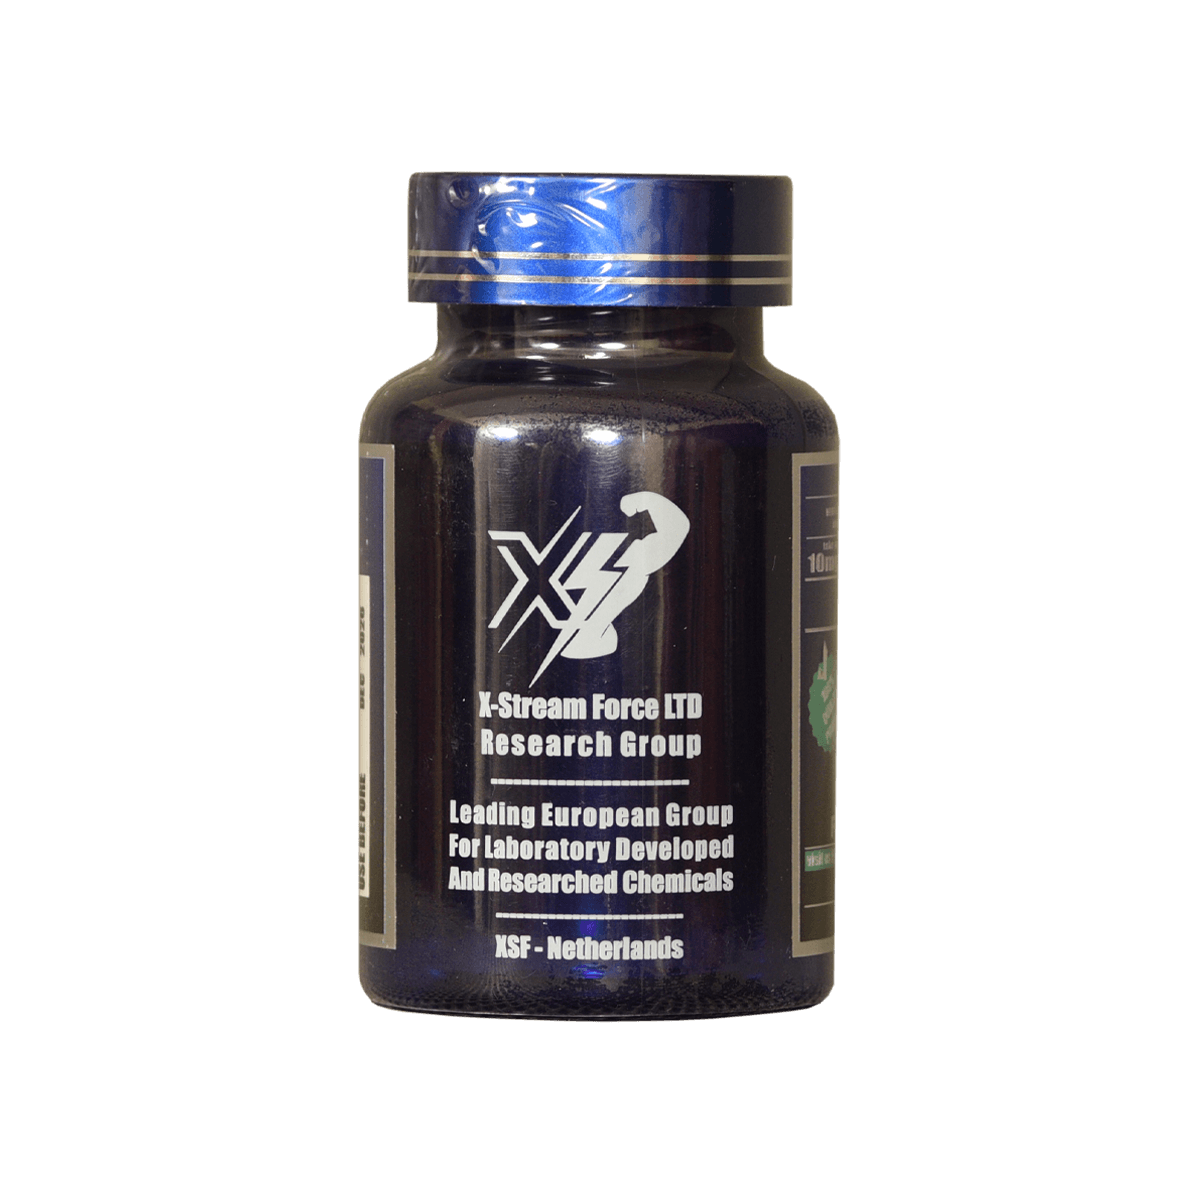 ibutamoren-mk677-capsules-sarm-900mg-muscle shop-xstreamforce-for recomp-rejuvenation-strength✦mk677 sarms✦ fitness supplements-muscle-hunter